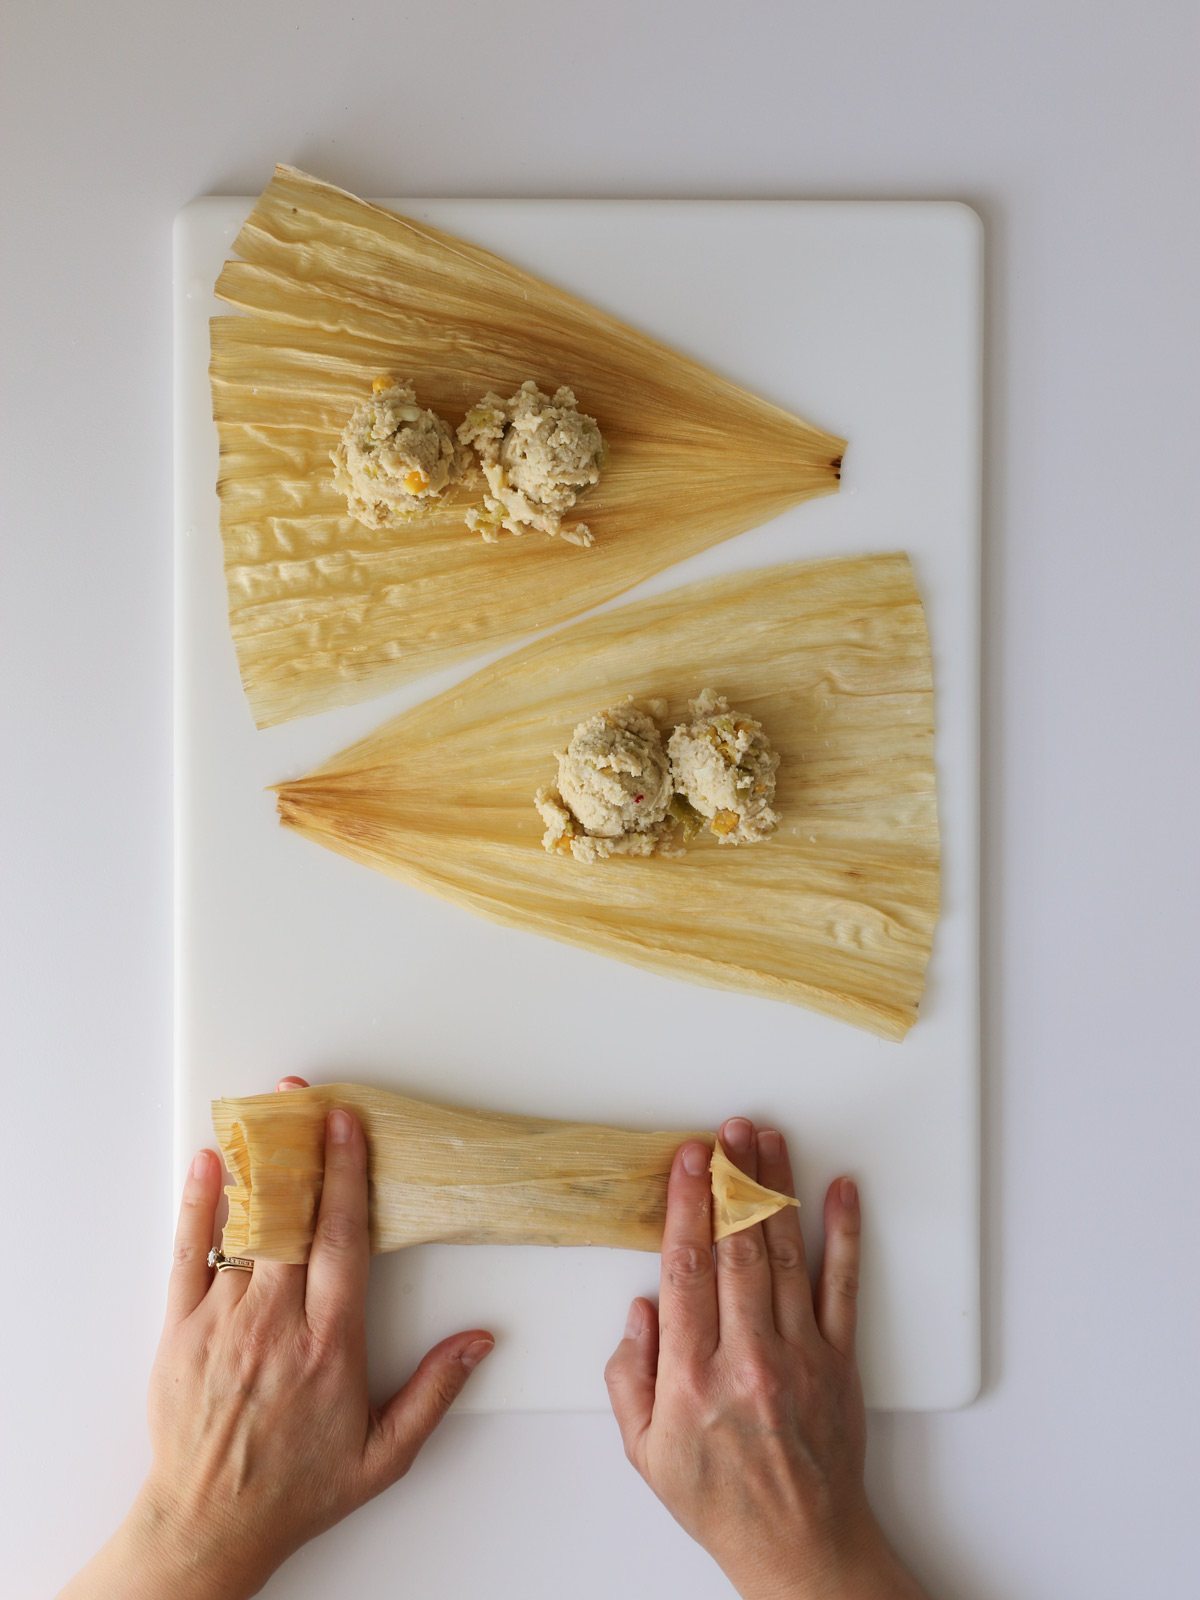 folding in the sides of the bottom tamale on the work surface.